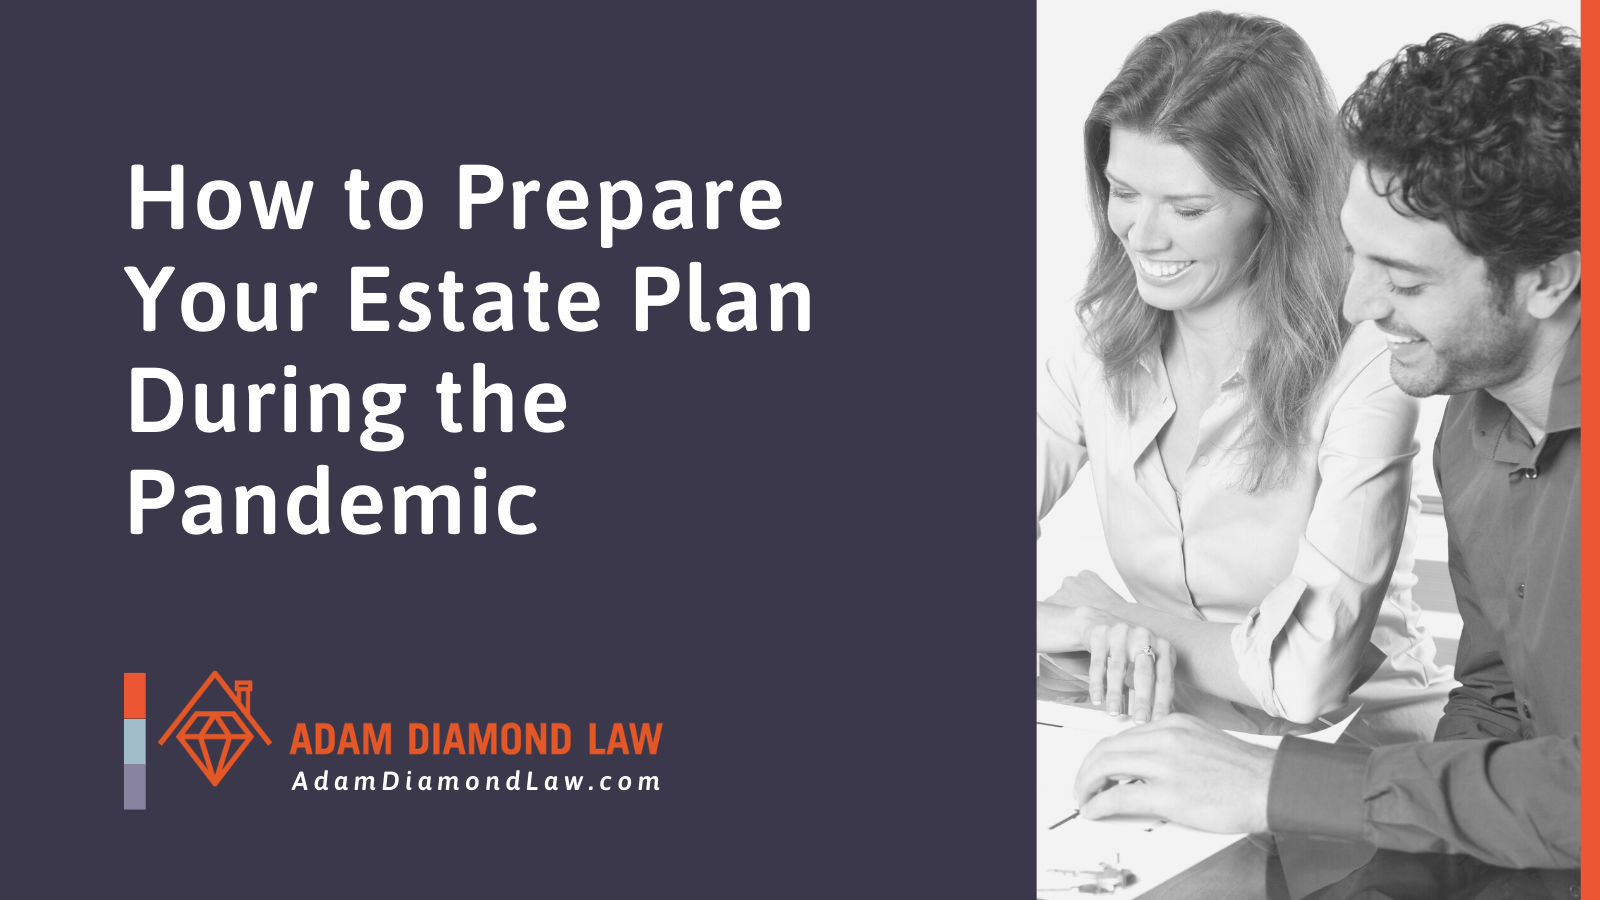 How to Prepare Your Estate Plan During the Pandemic - Adam Diamond Law | McHenry, IL Residential Real Estate Lawyer